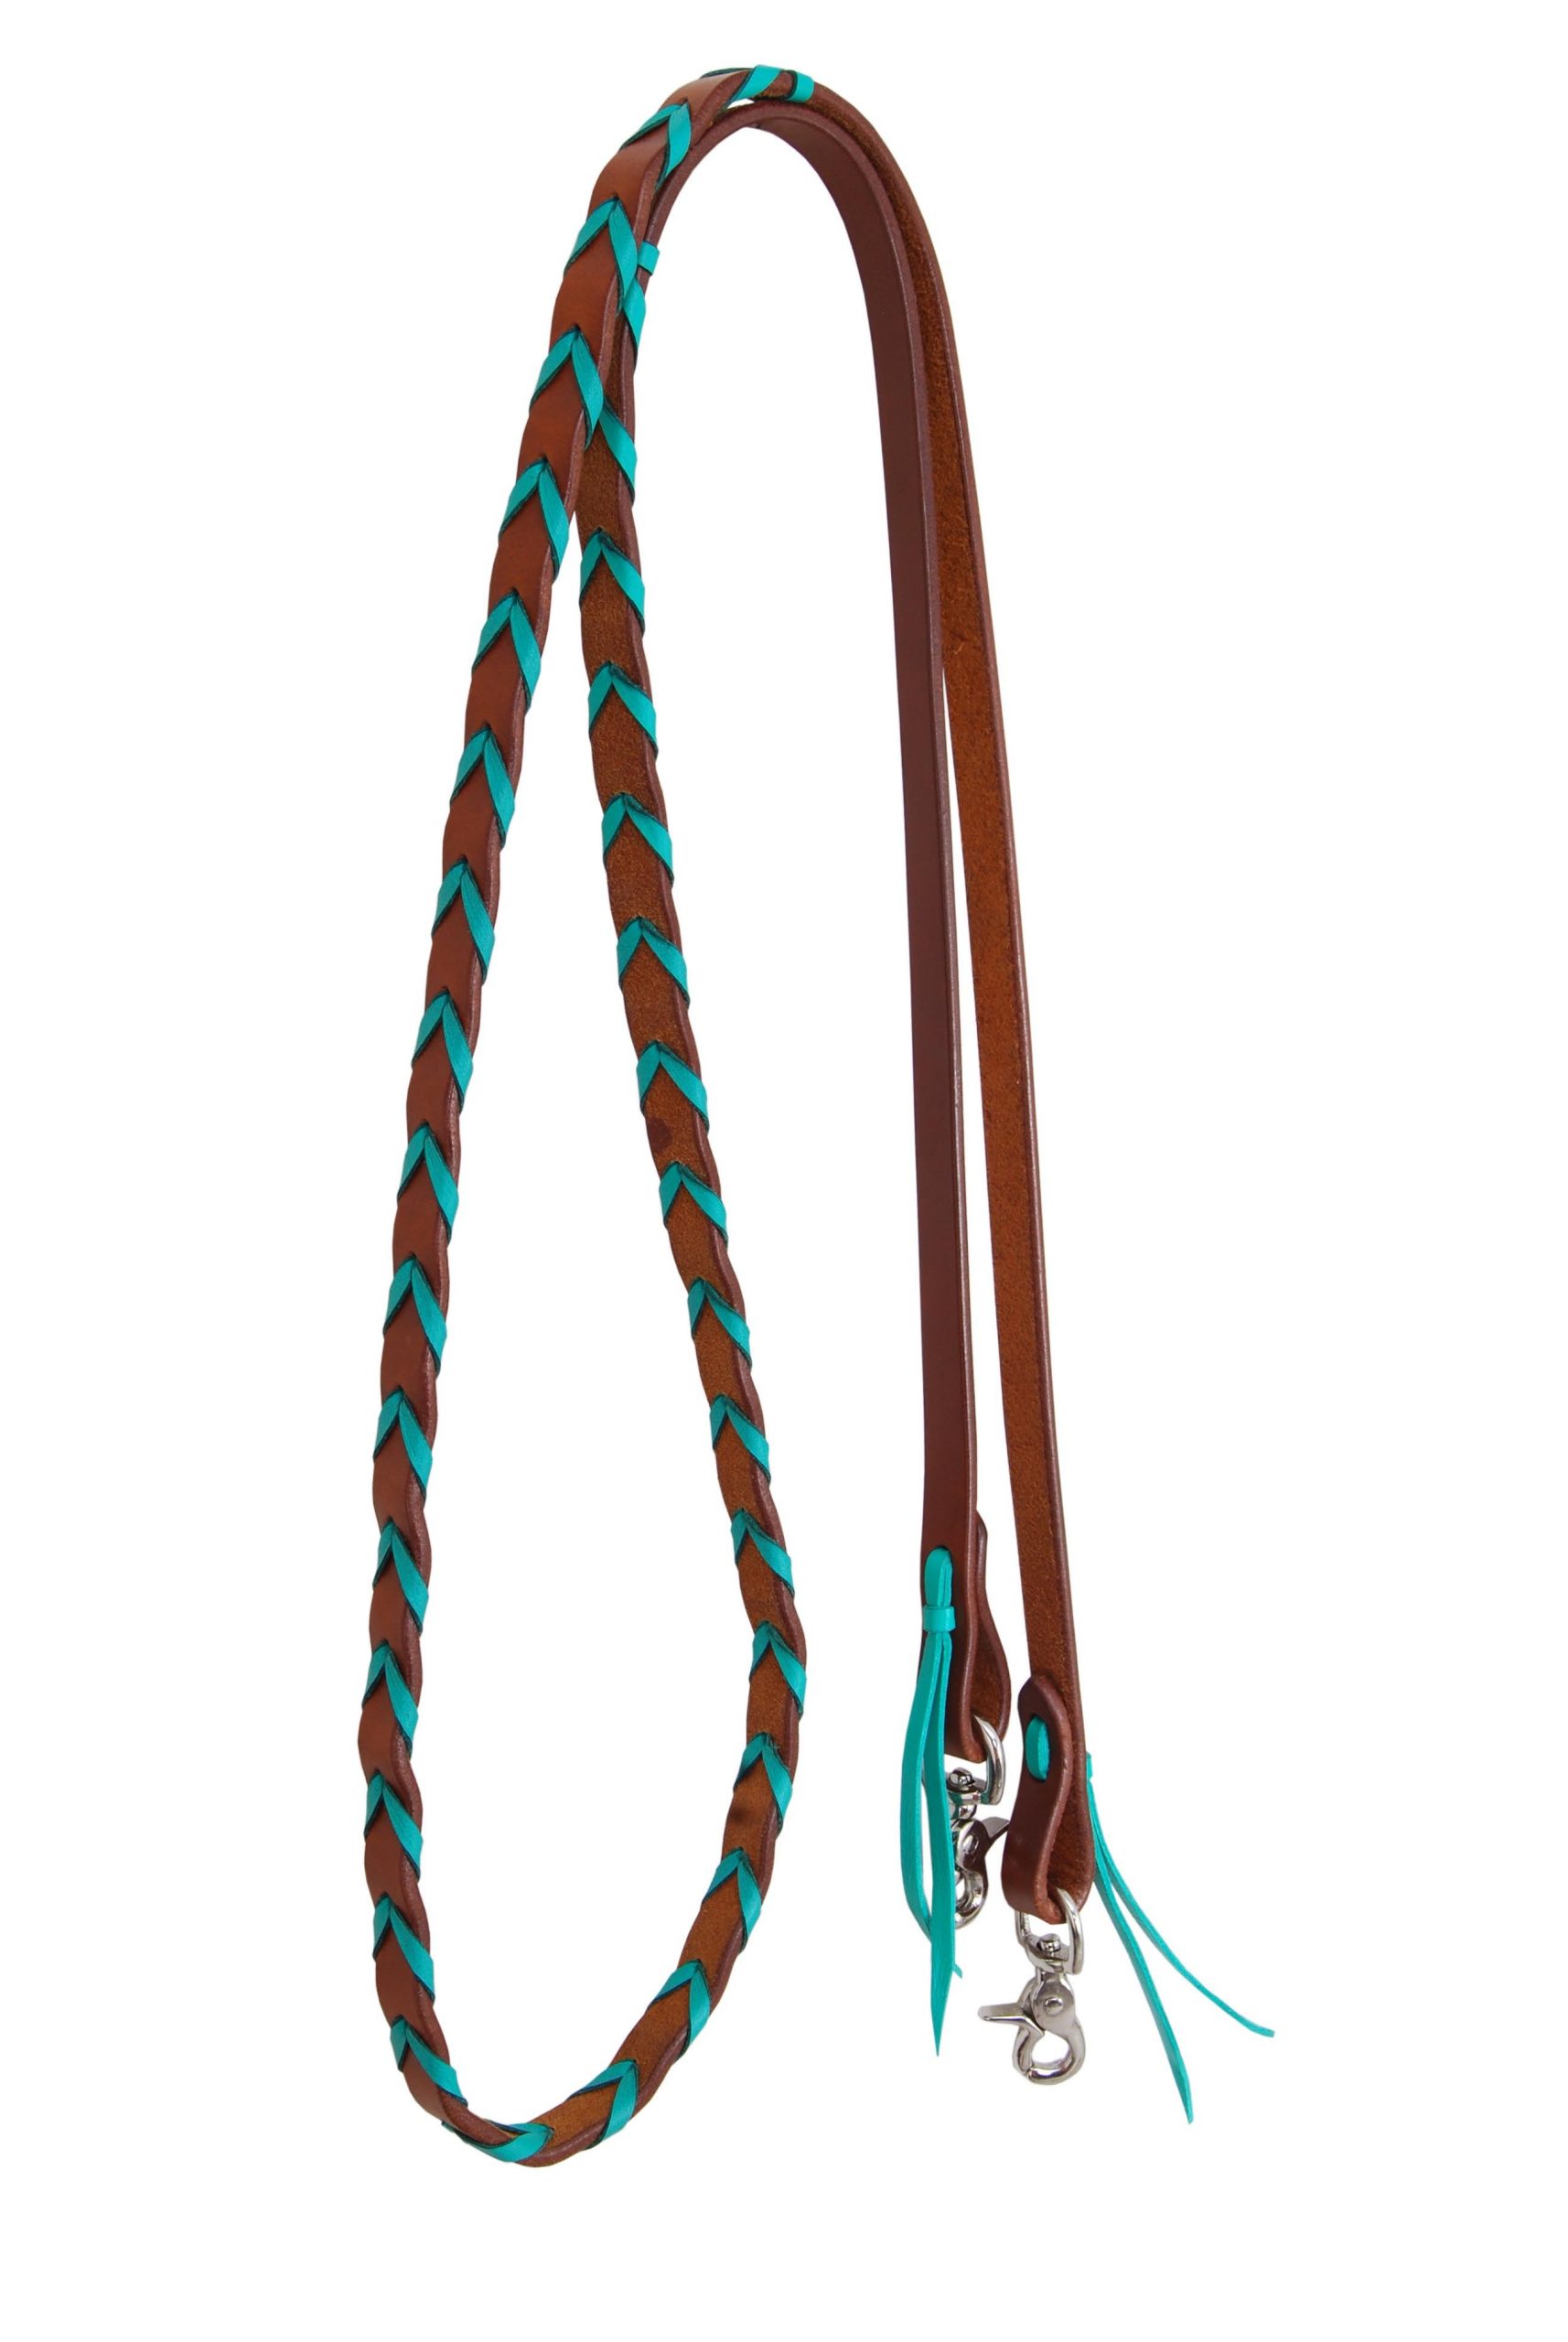 Horse Roping Knotted Tack Western Barrel Reins Nylon Braided Turquoise 607321 